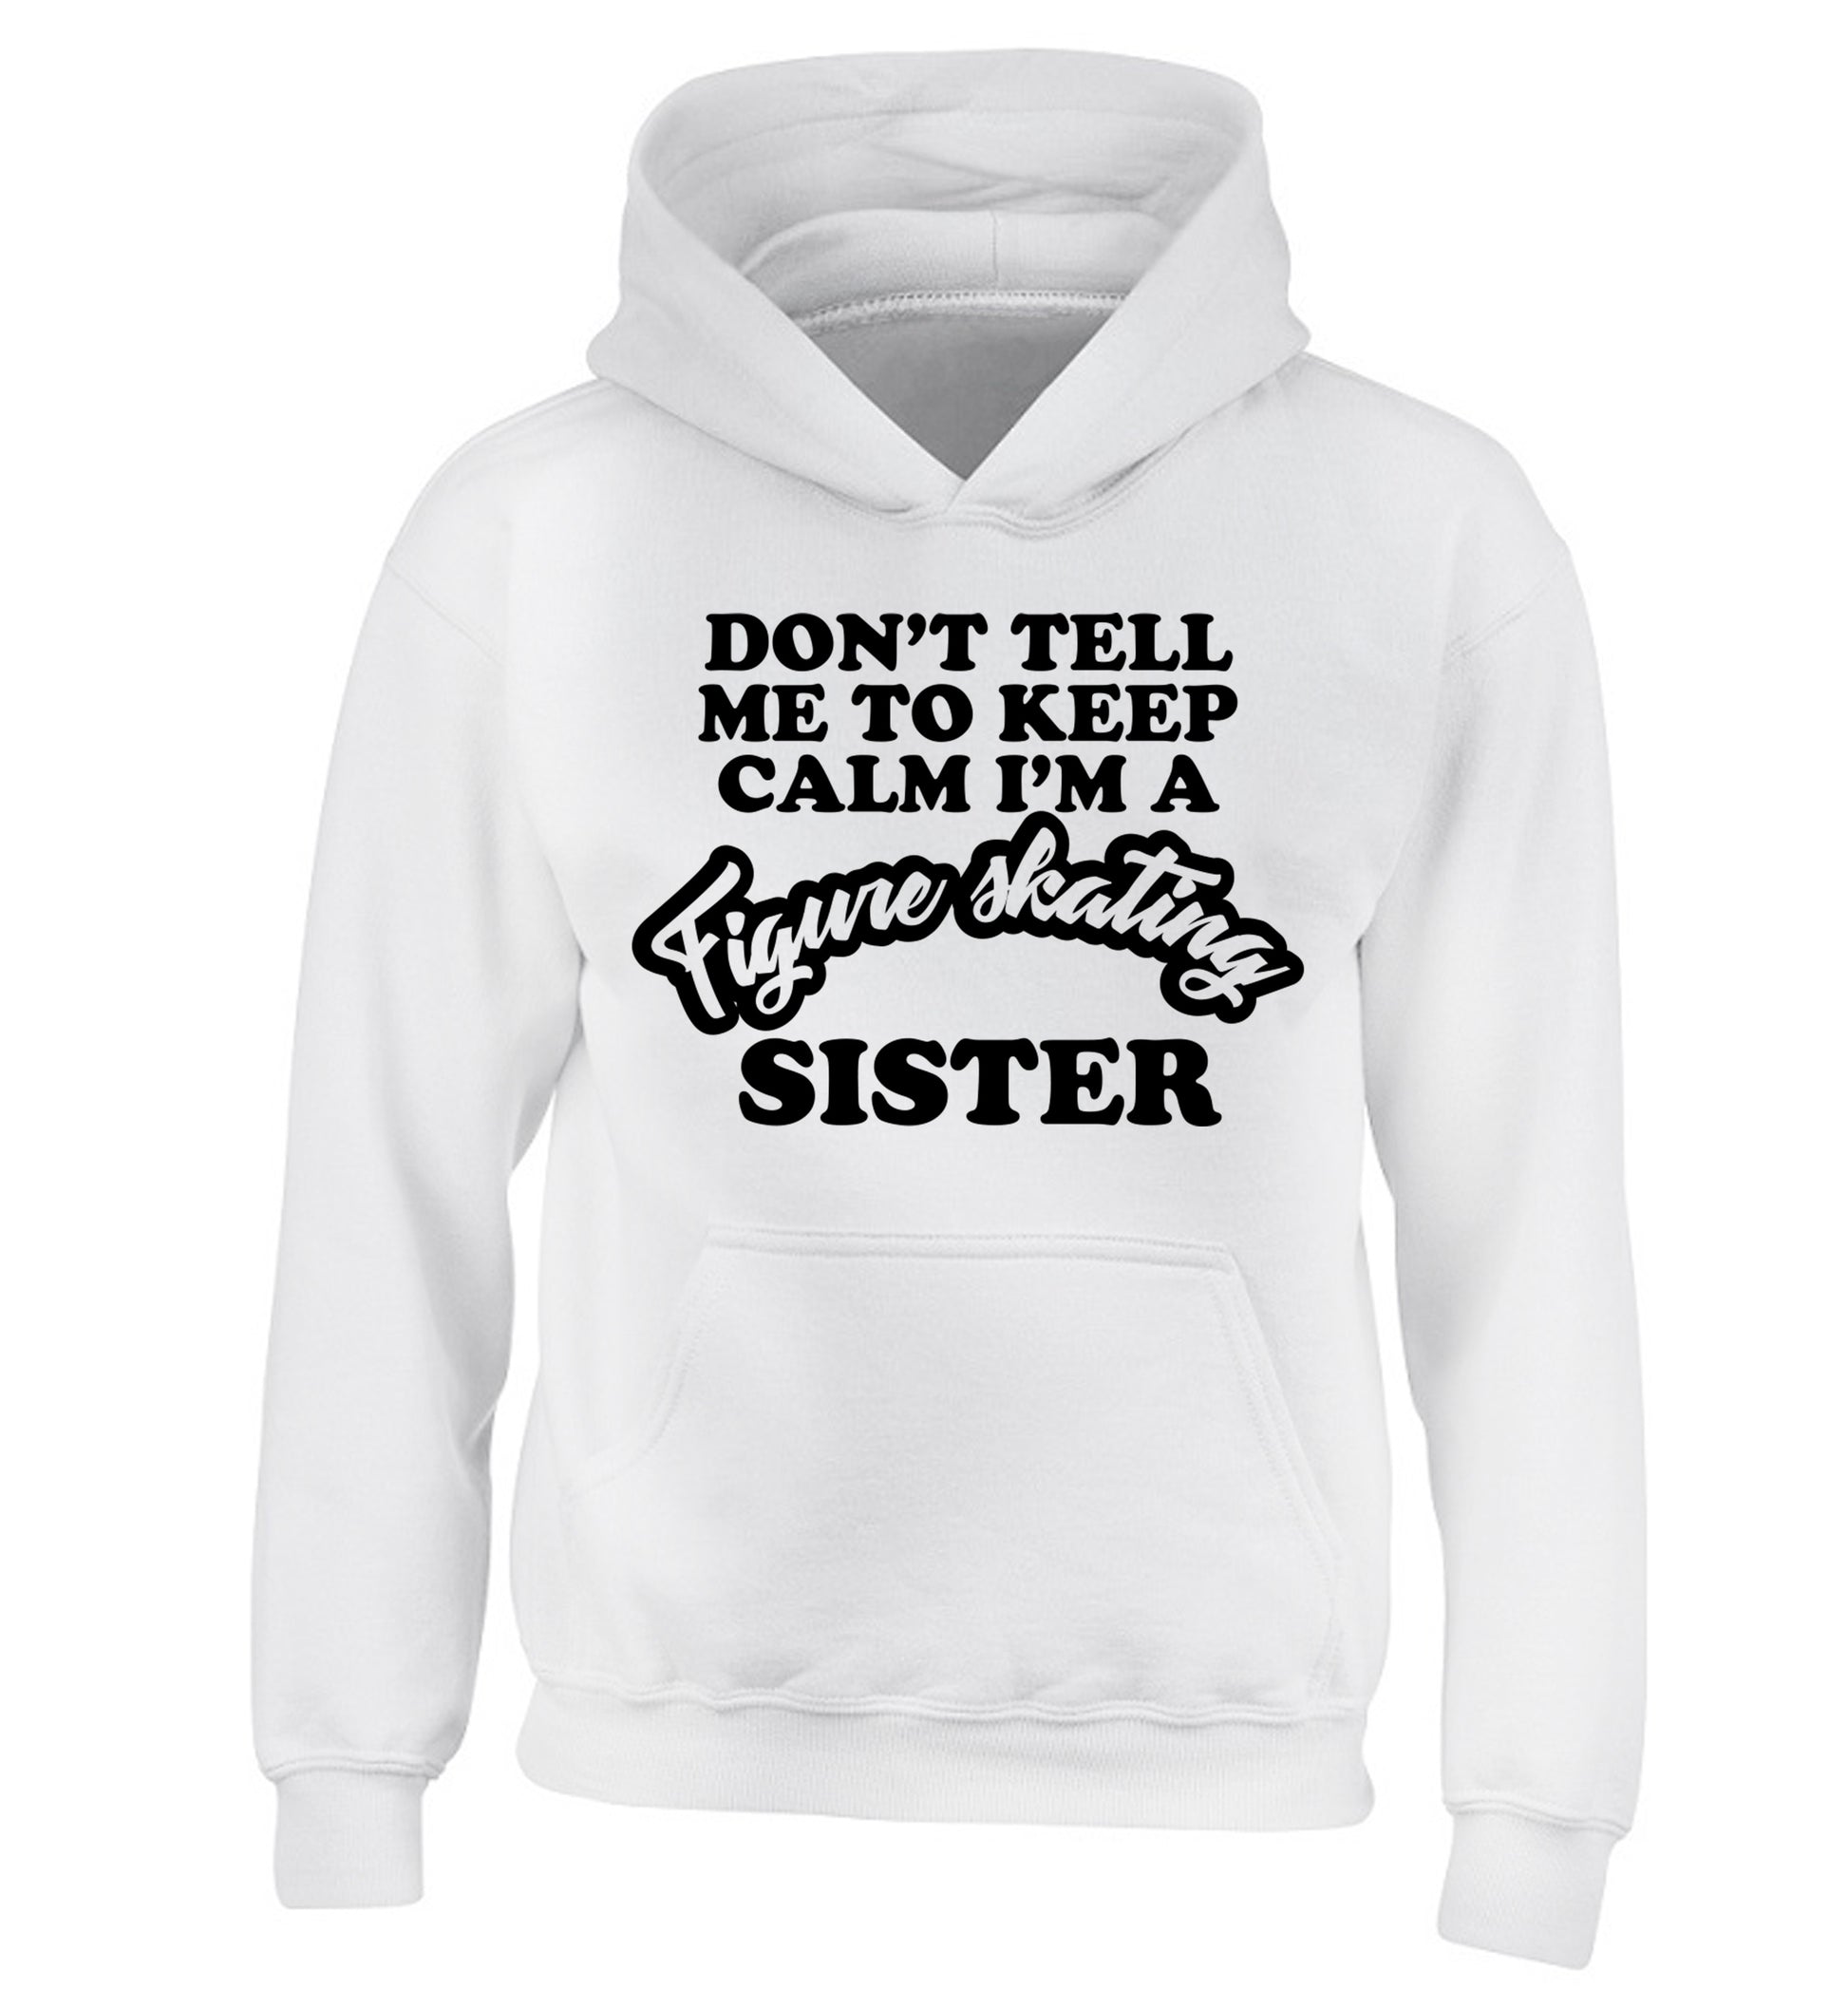 Don't tell me to keep calm I'm a figure skating sister children's white hoodie 12-14 Years